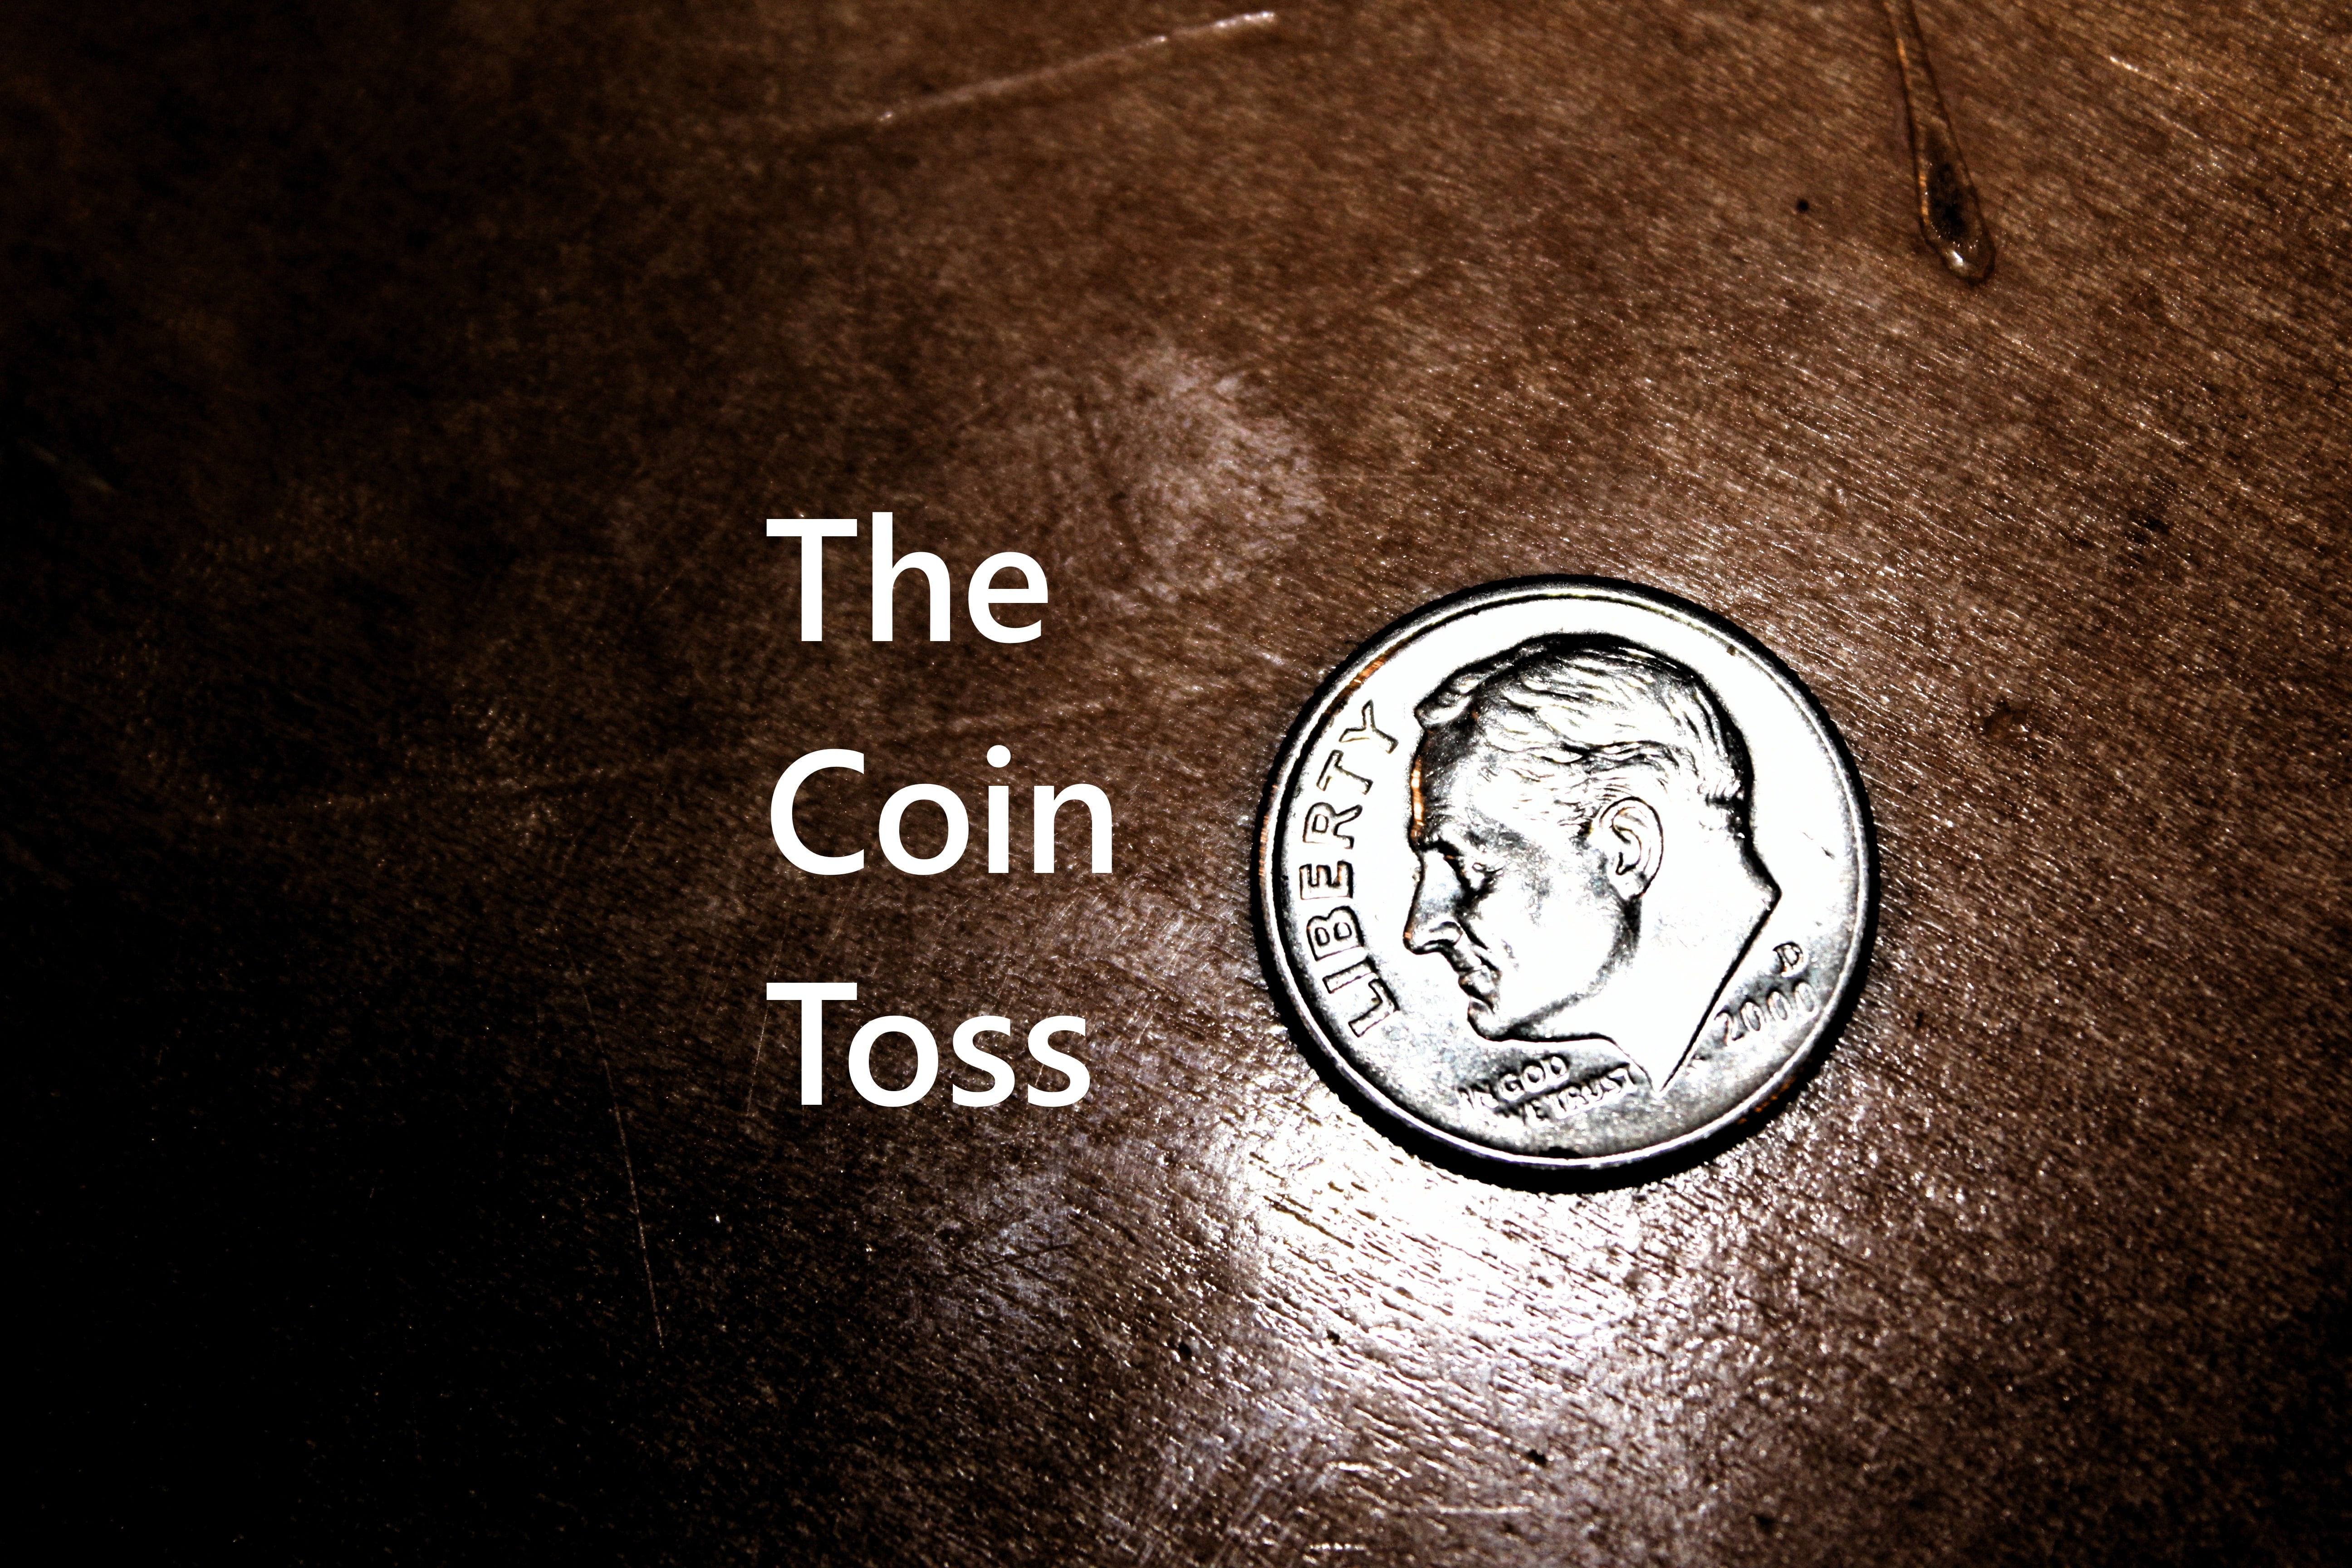 Coin toss betting game rule 10b 5 aiding and abetting a felon